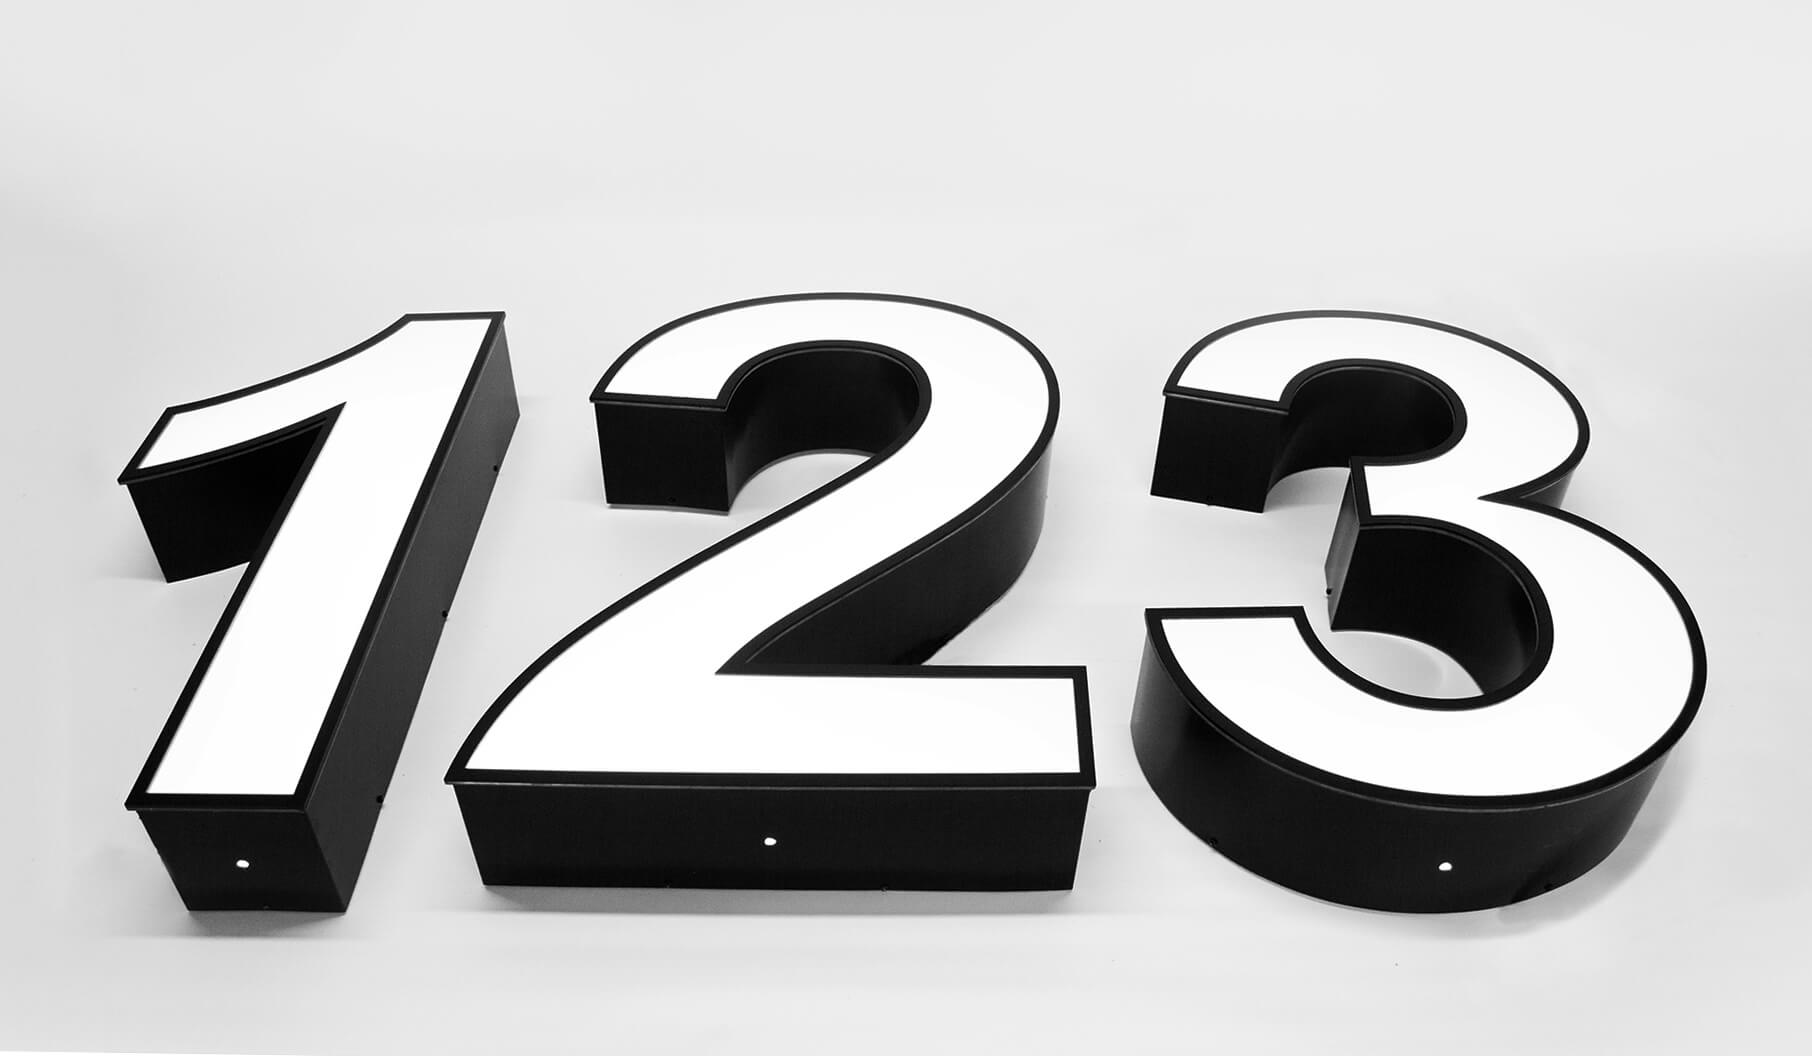 Numbers 123 - Marking the building with illuminated numerals